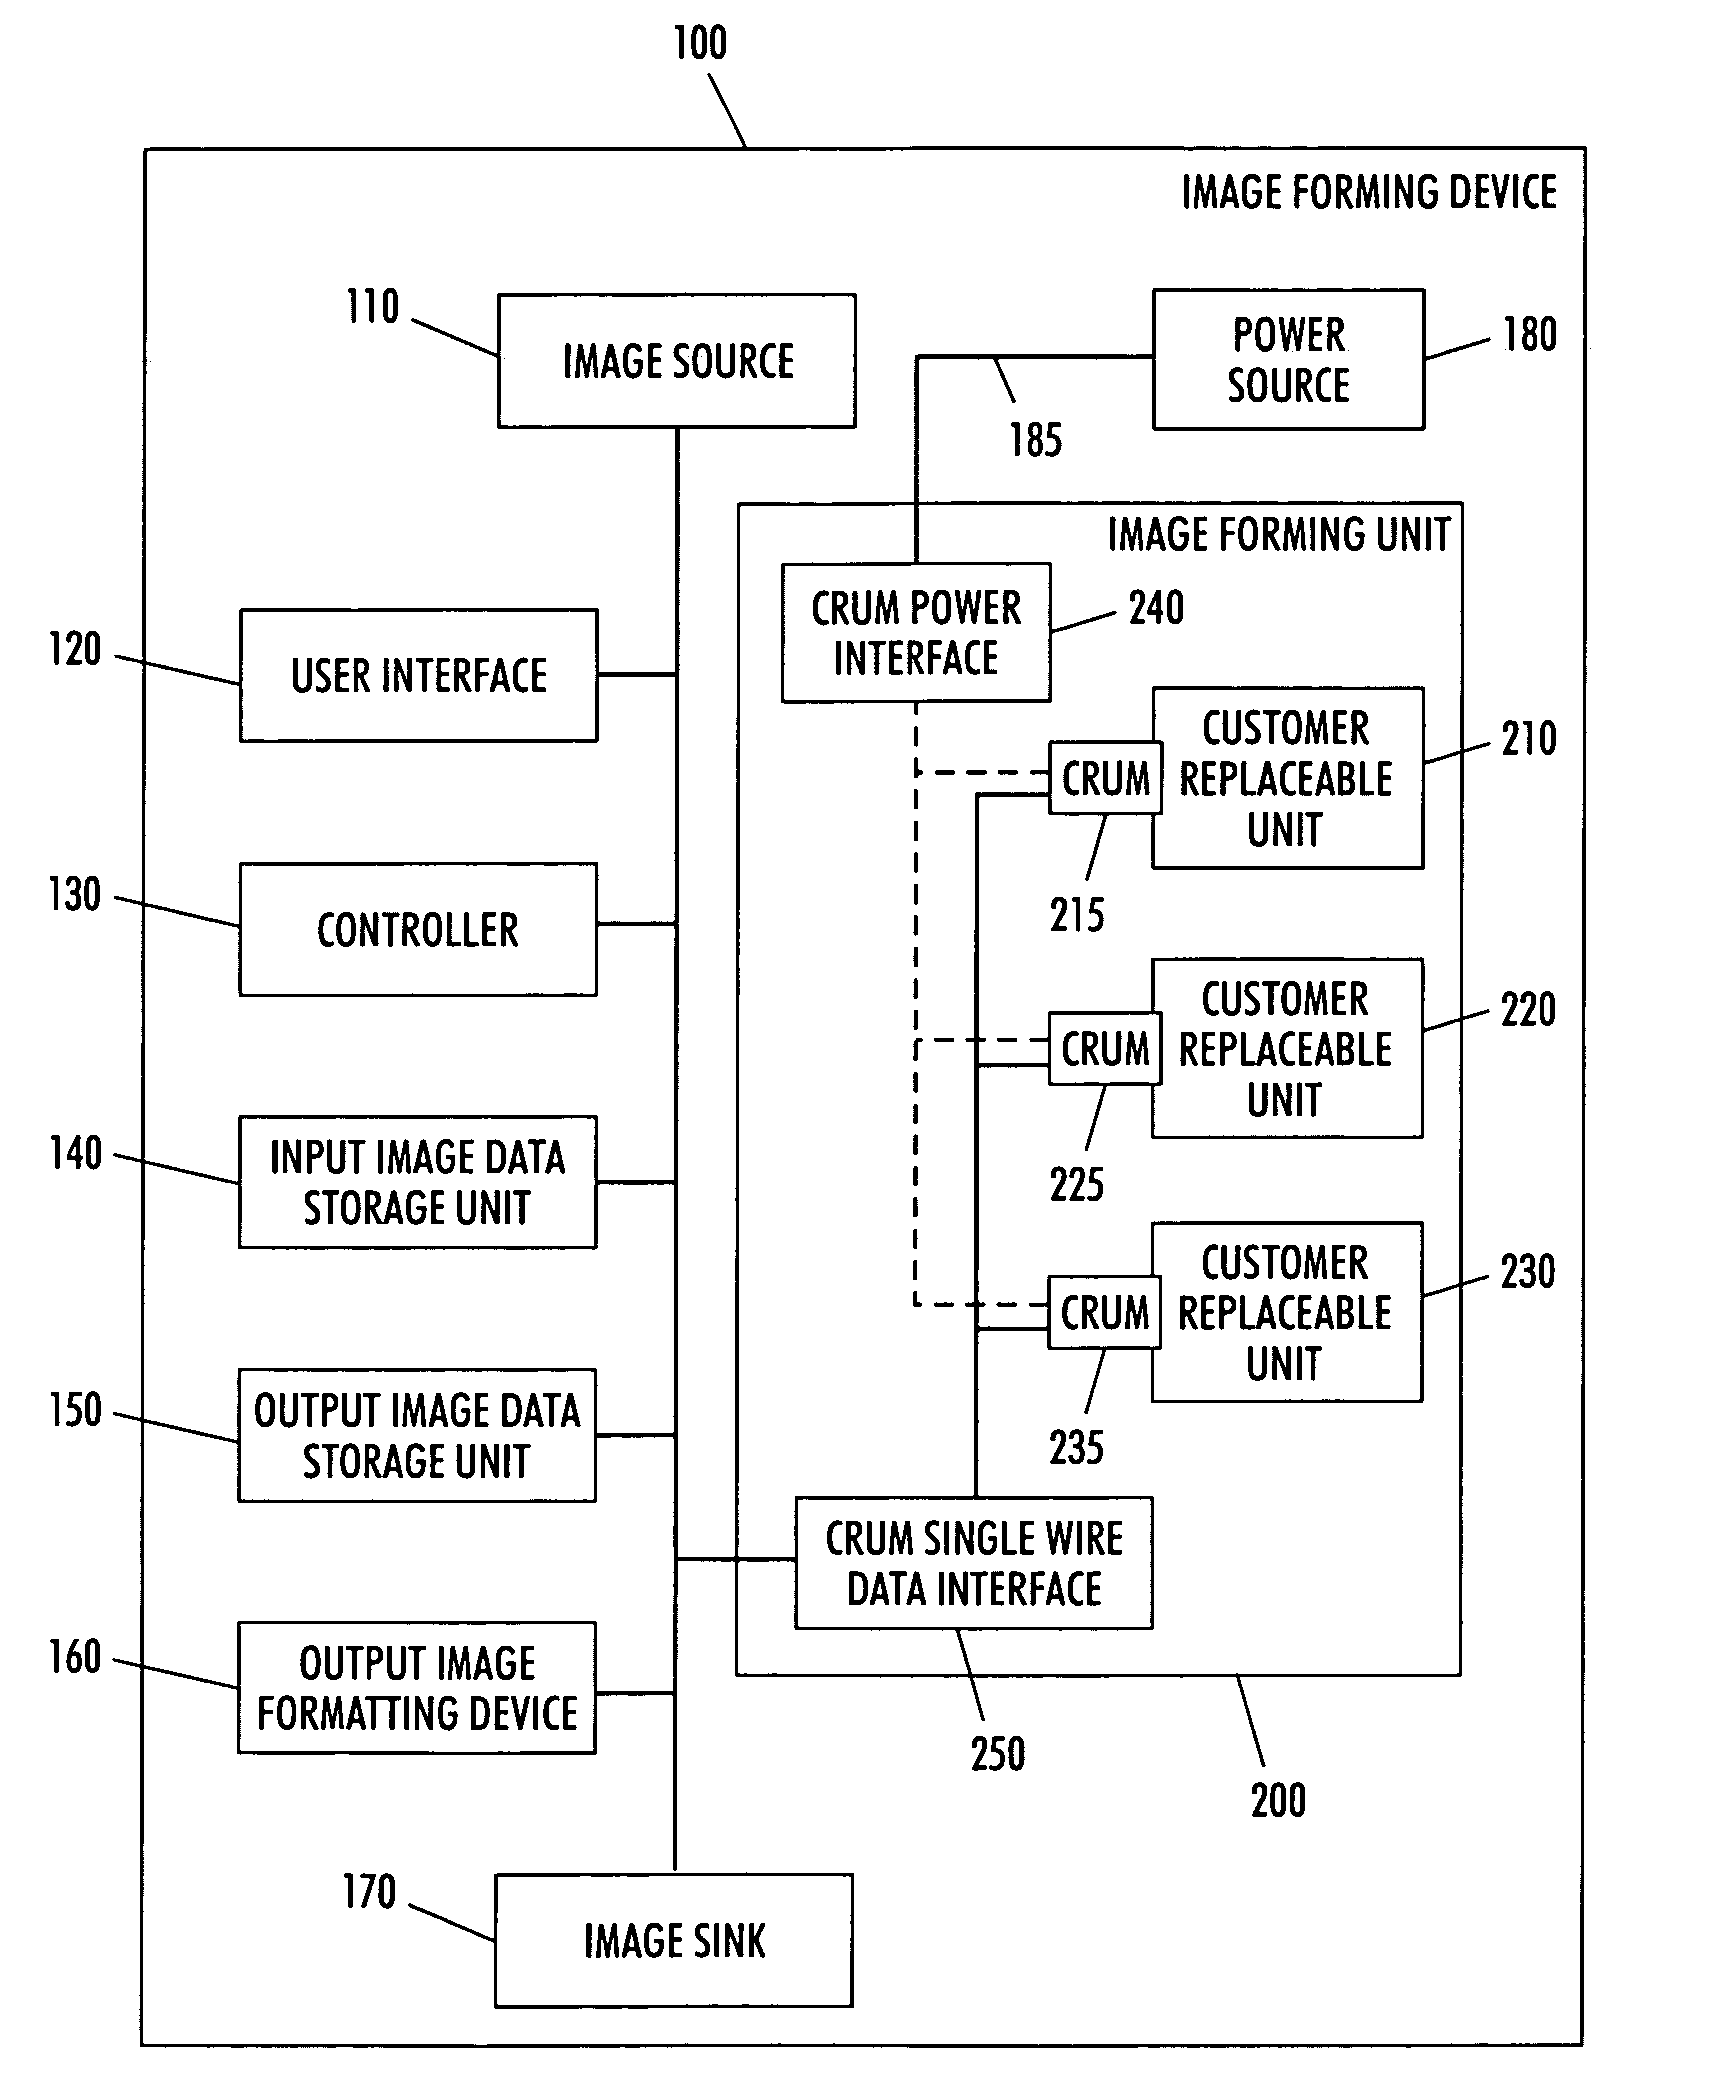 Systems and methods for single wire communication and interaction with a customer replaceable unit monitor